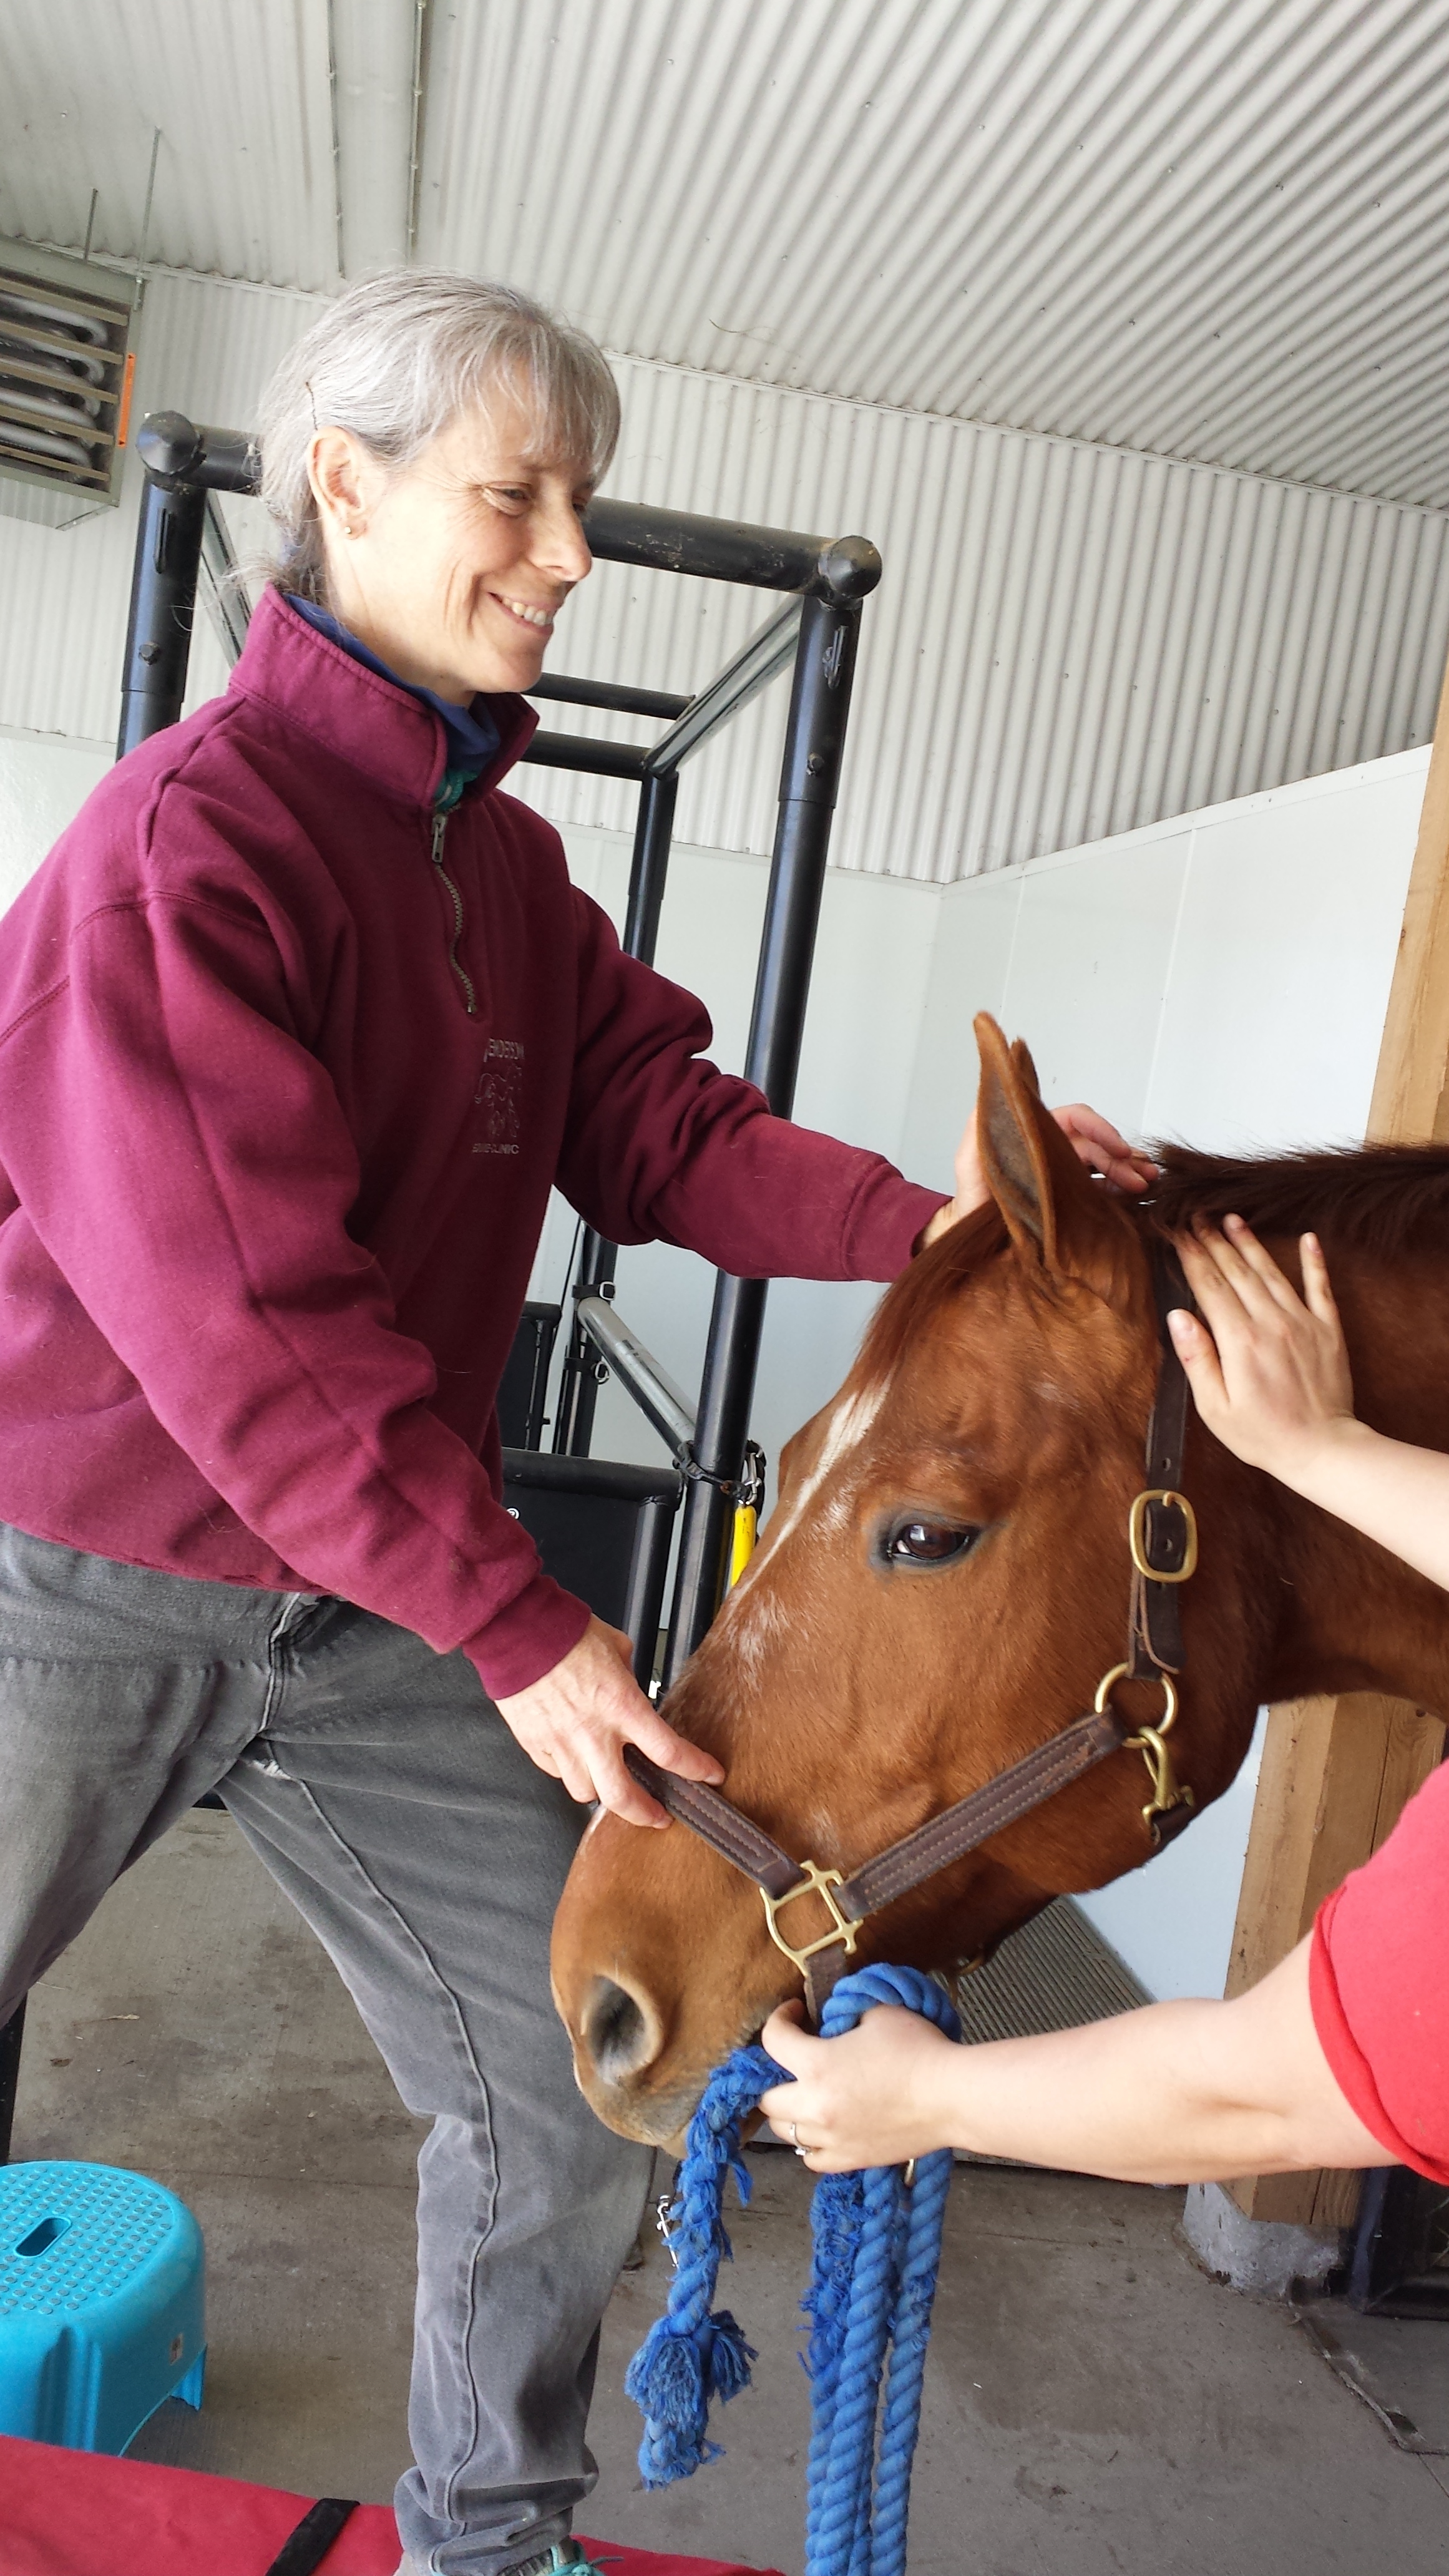 Adjusting the Poll on an Equine Patient